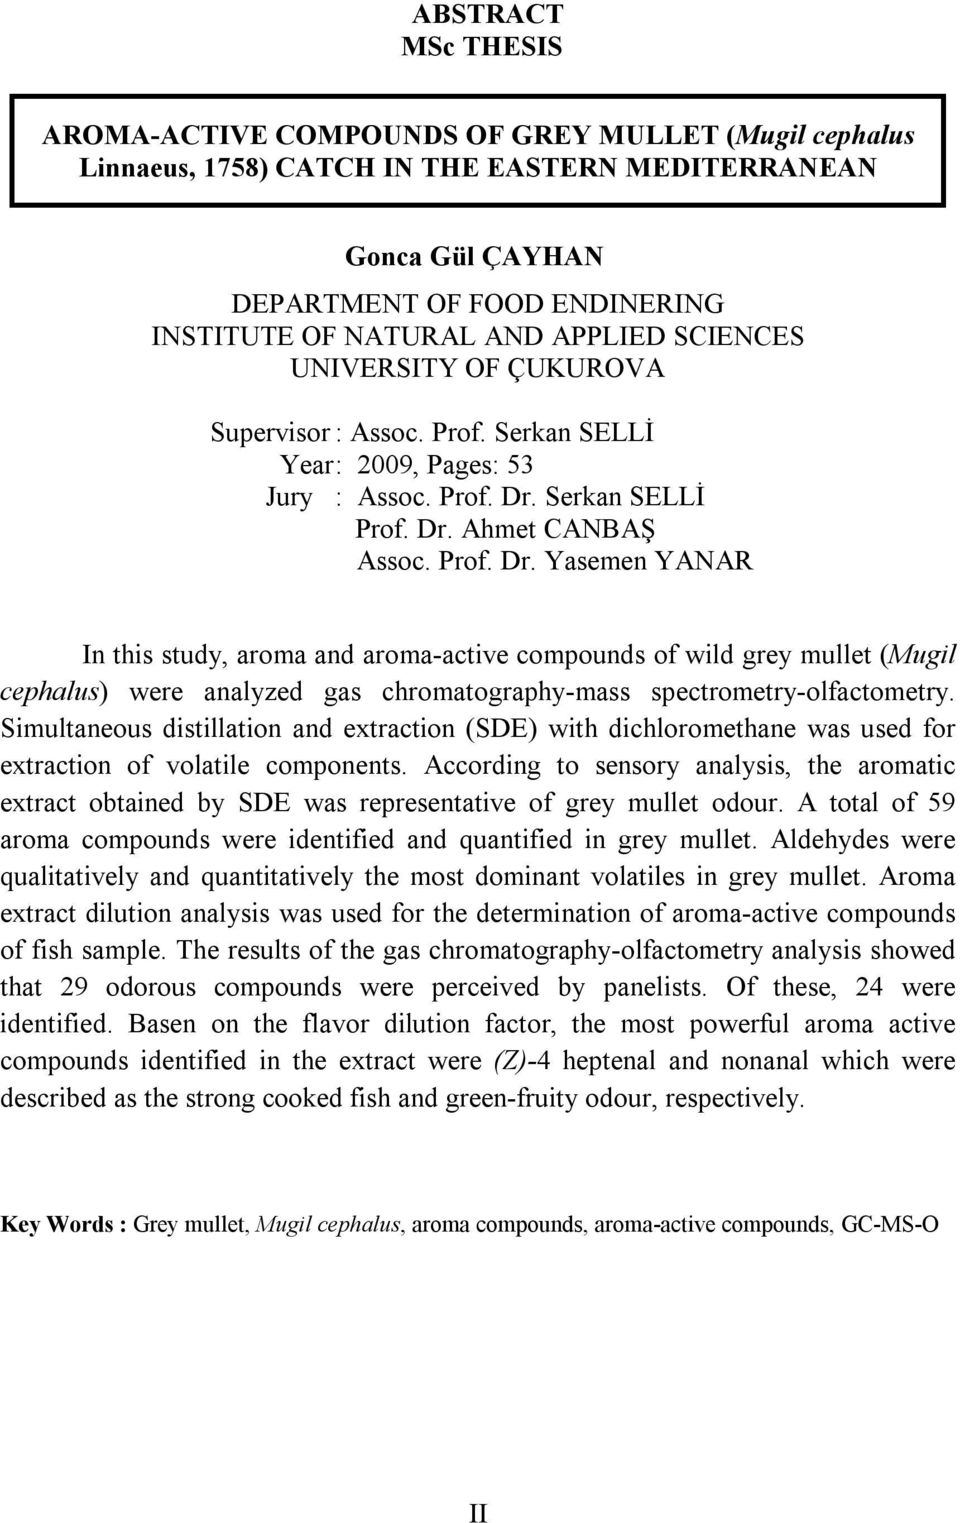 Serkan SELLİ Prof. Dr. Ahmet CANBAŞ Assoc. Prof. Dr. Yasemen YANAR In this study, aroma and aroma-active compounds of wild grey mullet (Mugil cephalus) were analyzed gas chromatography-mass spectrometry-olfactometry.